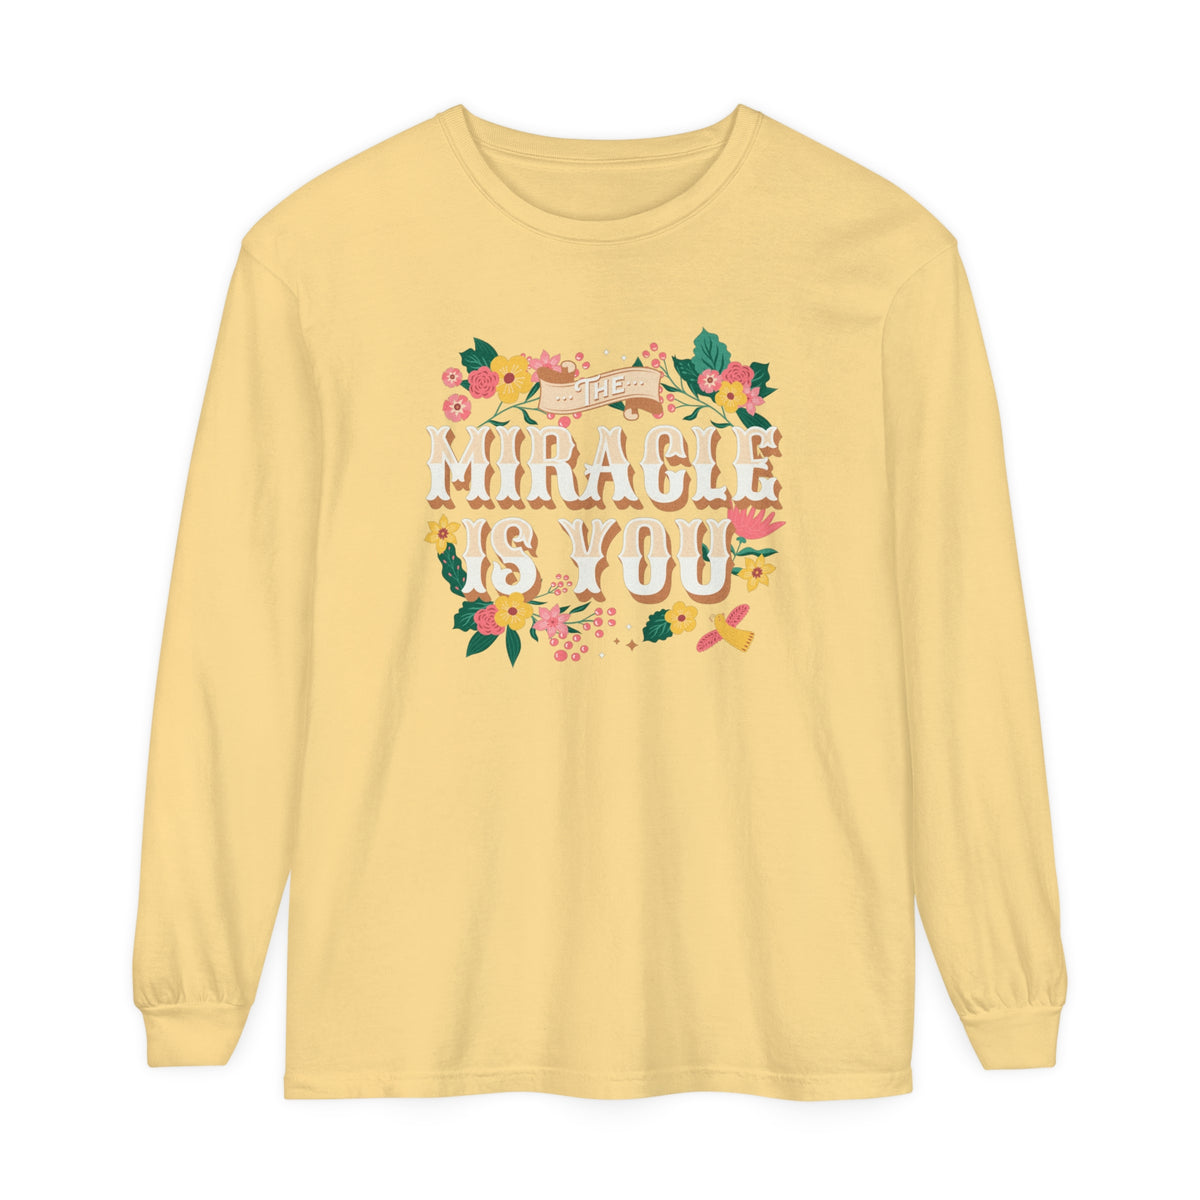 The Miracle Is You Comfort Colors Unisex Garment-dyed Long Sleeve T-Shirt